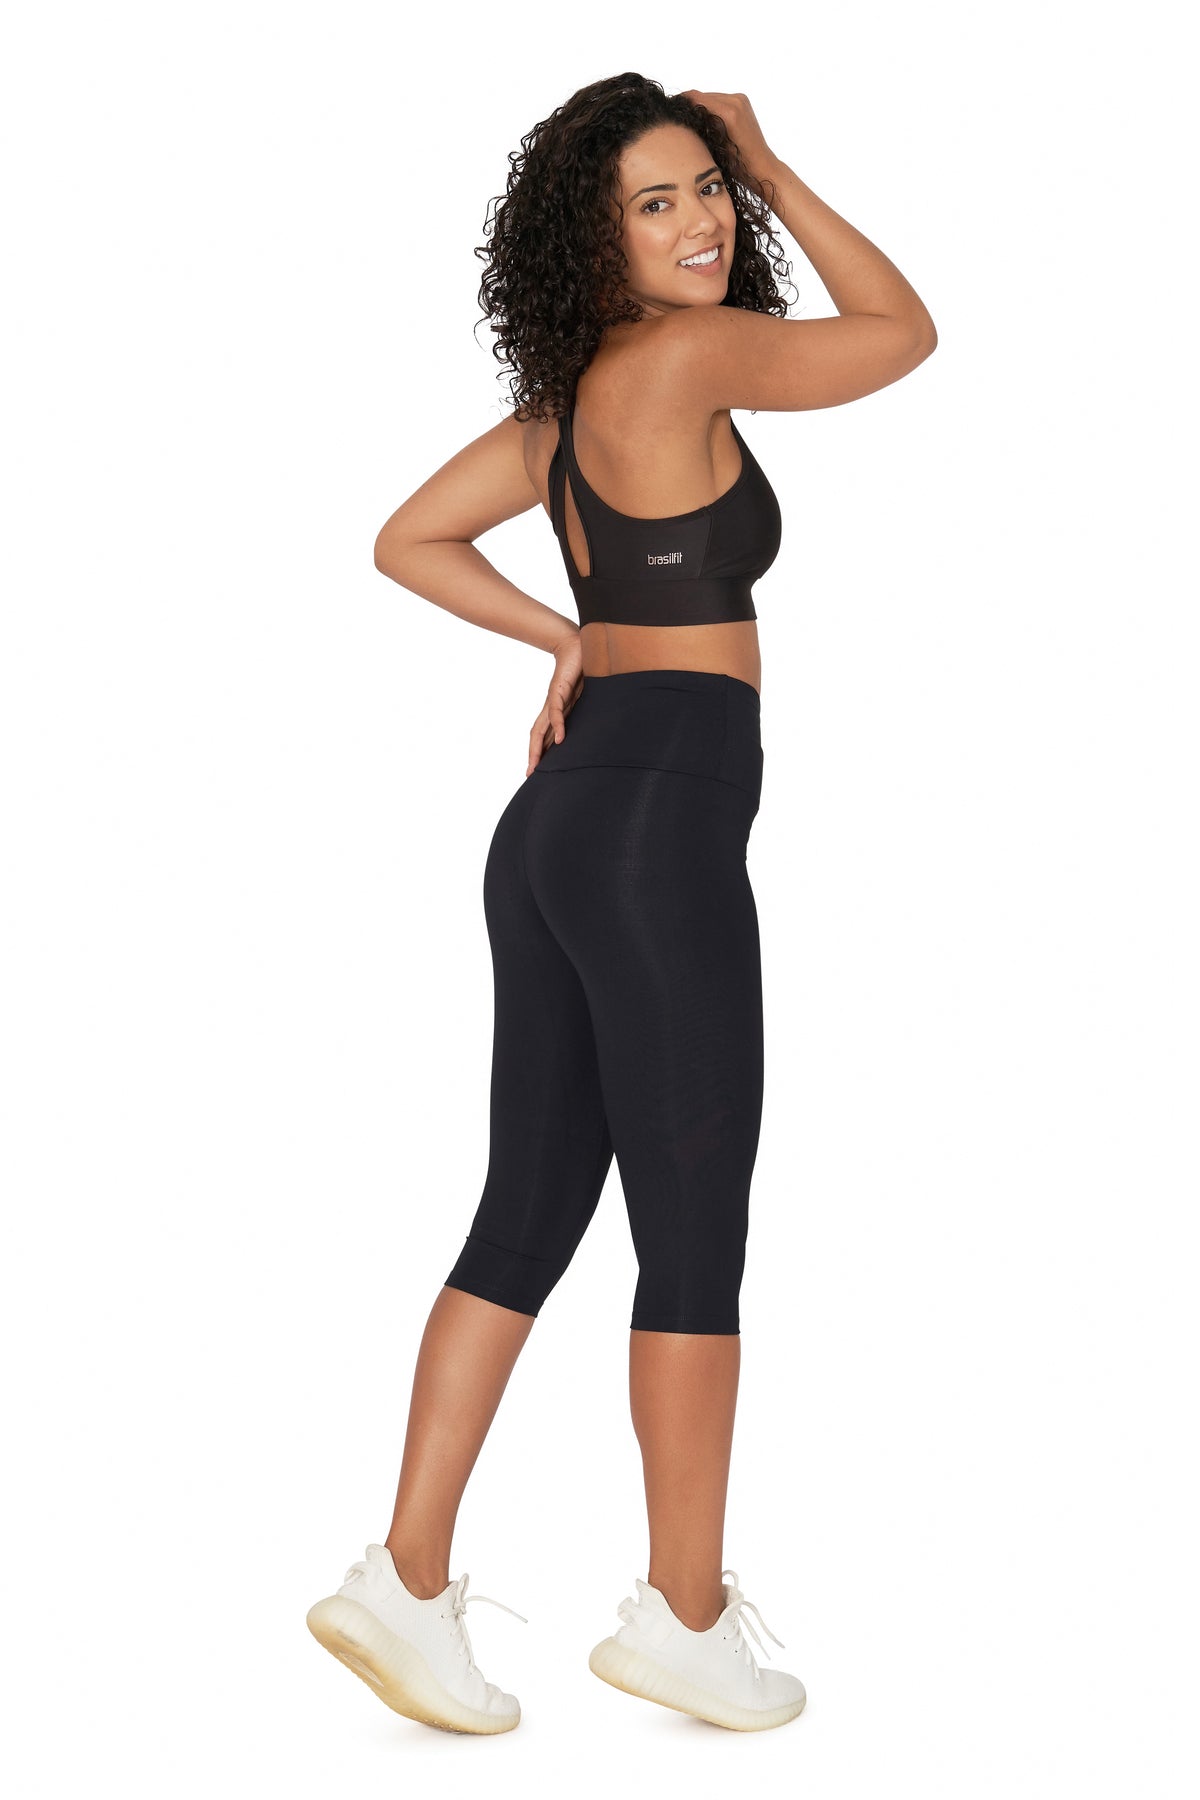 High Waisted Basic Xtreme Under Knee Tights